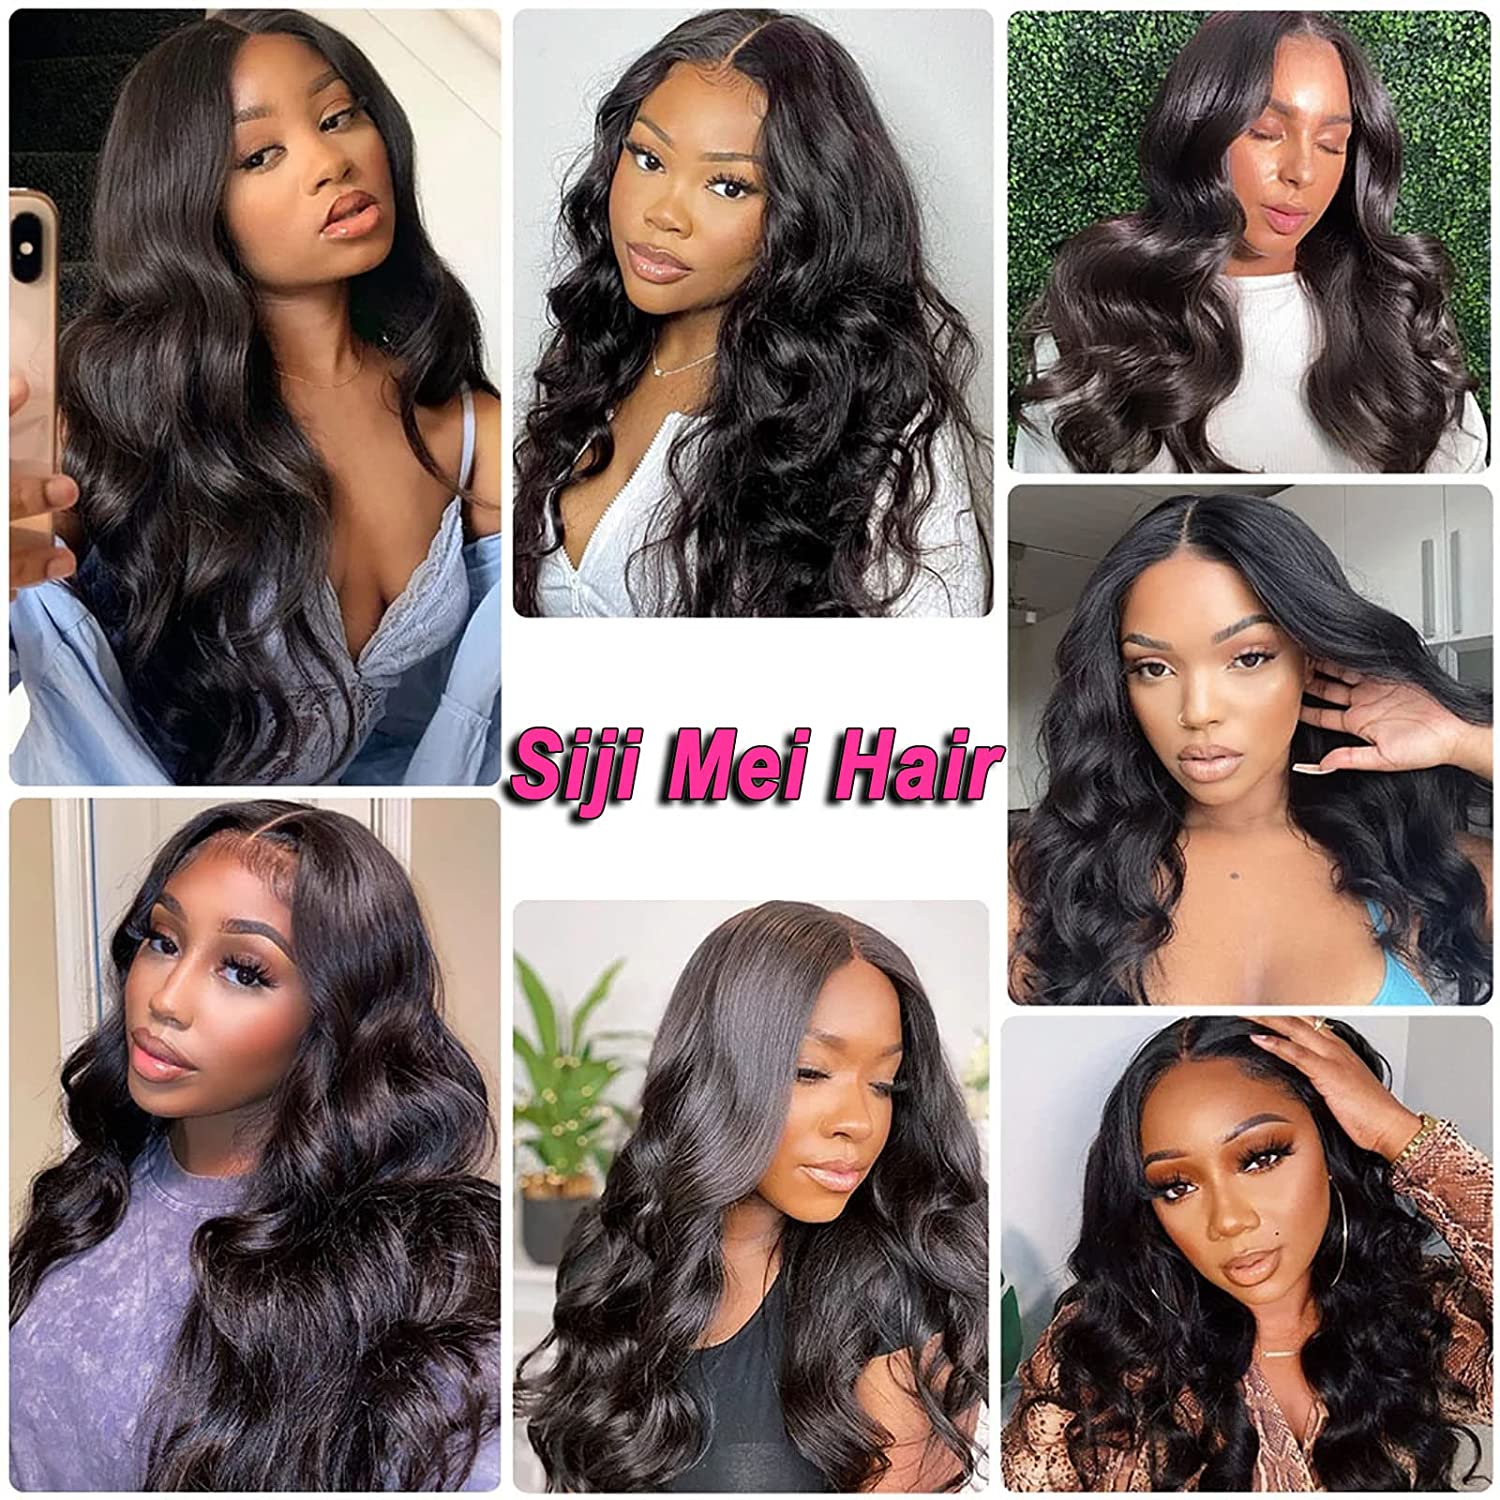 Siji Mei Lace Front Wigs Human Hair Body Wave 4x4 Lace Closure Wigs For Black Women Pre Plucked 